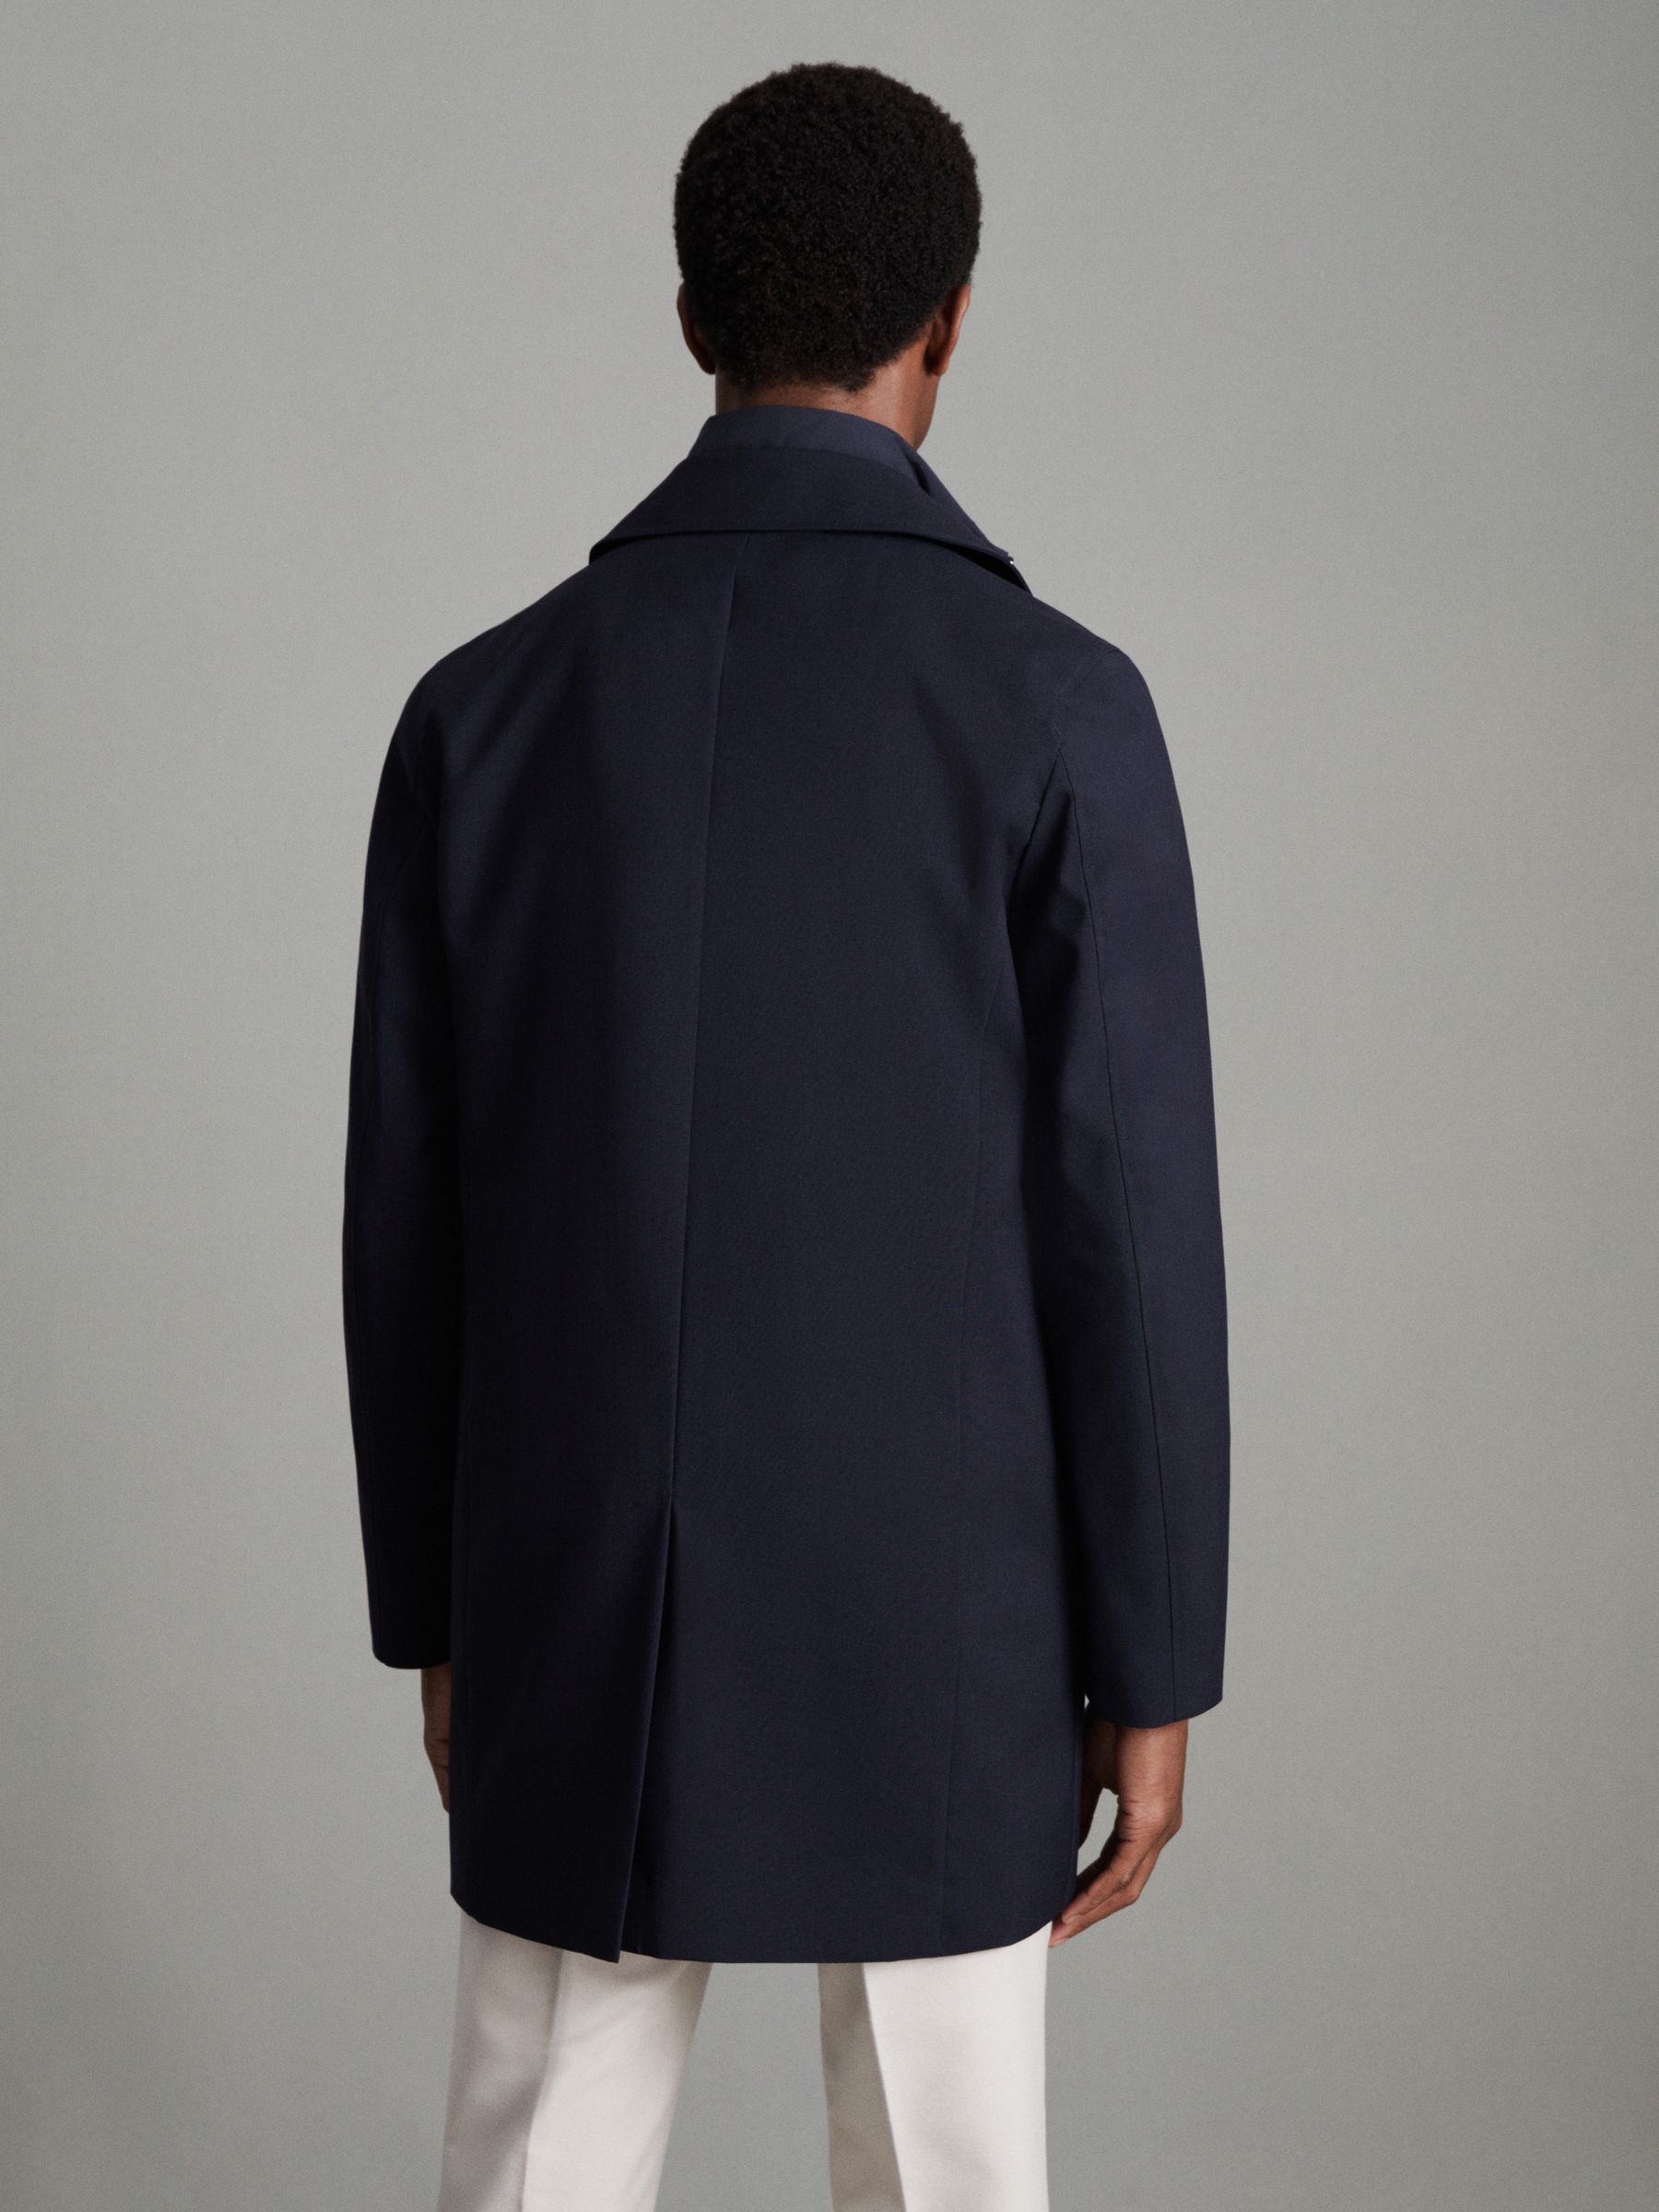 Reiss Perrin Jacket With Removable Funnel-Neck Insert - REISS